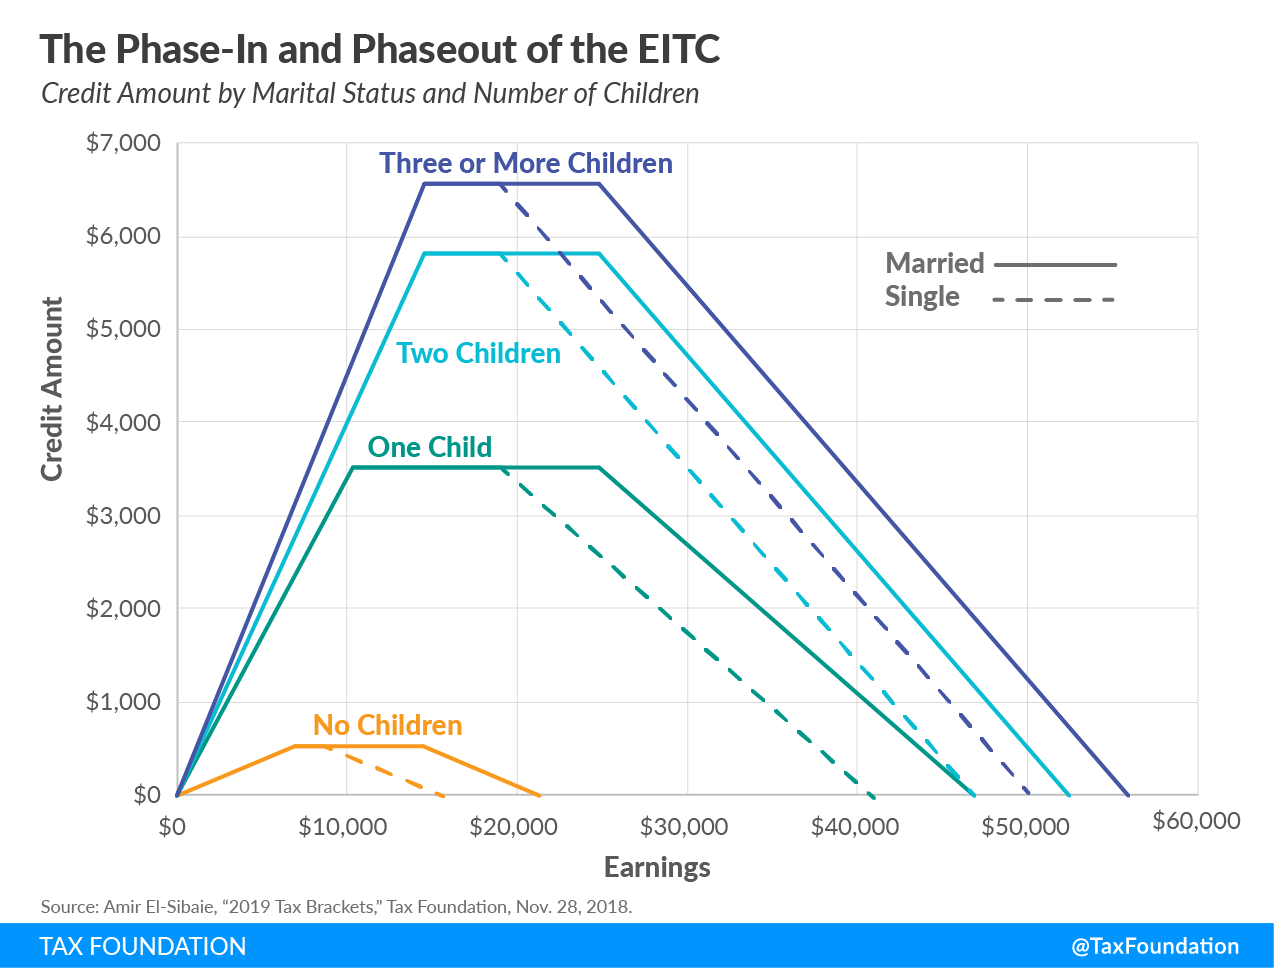 The Phase-In and Phaseout of the EITC Earned Income Tax Credit